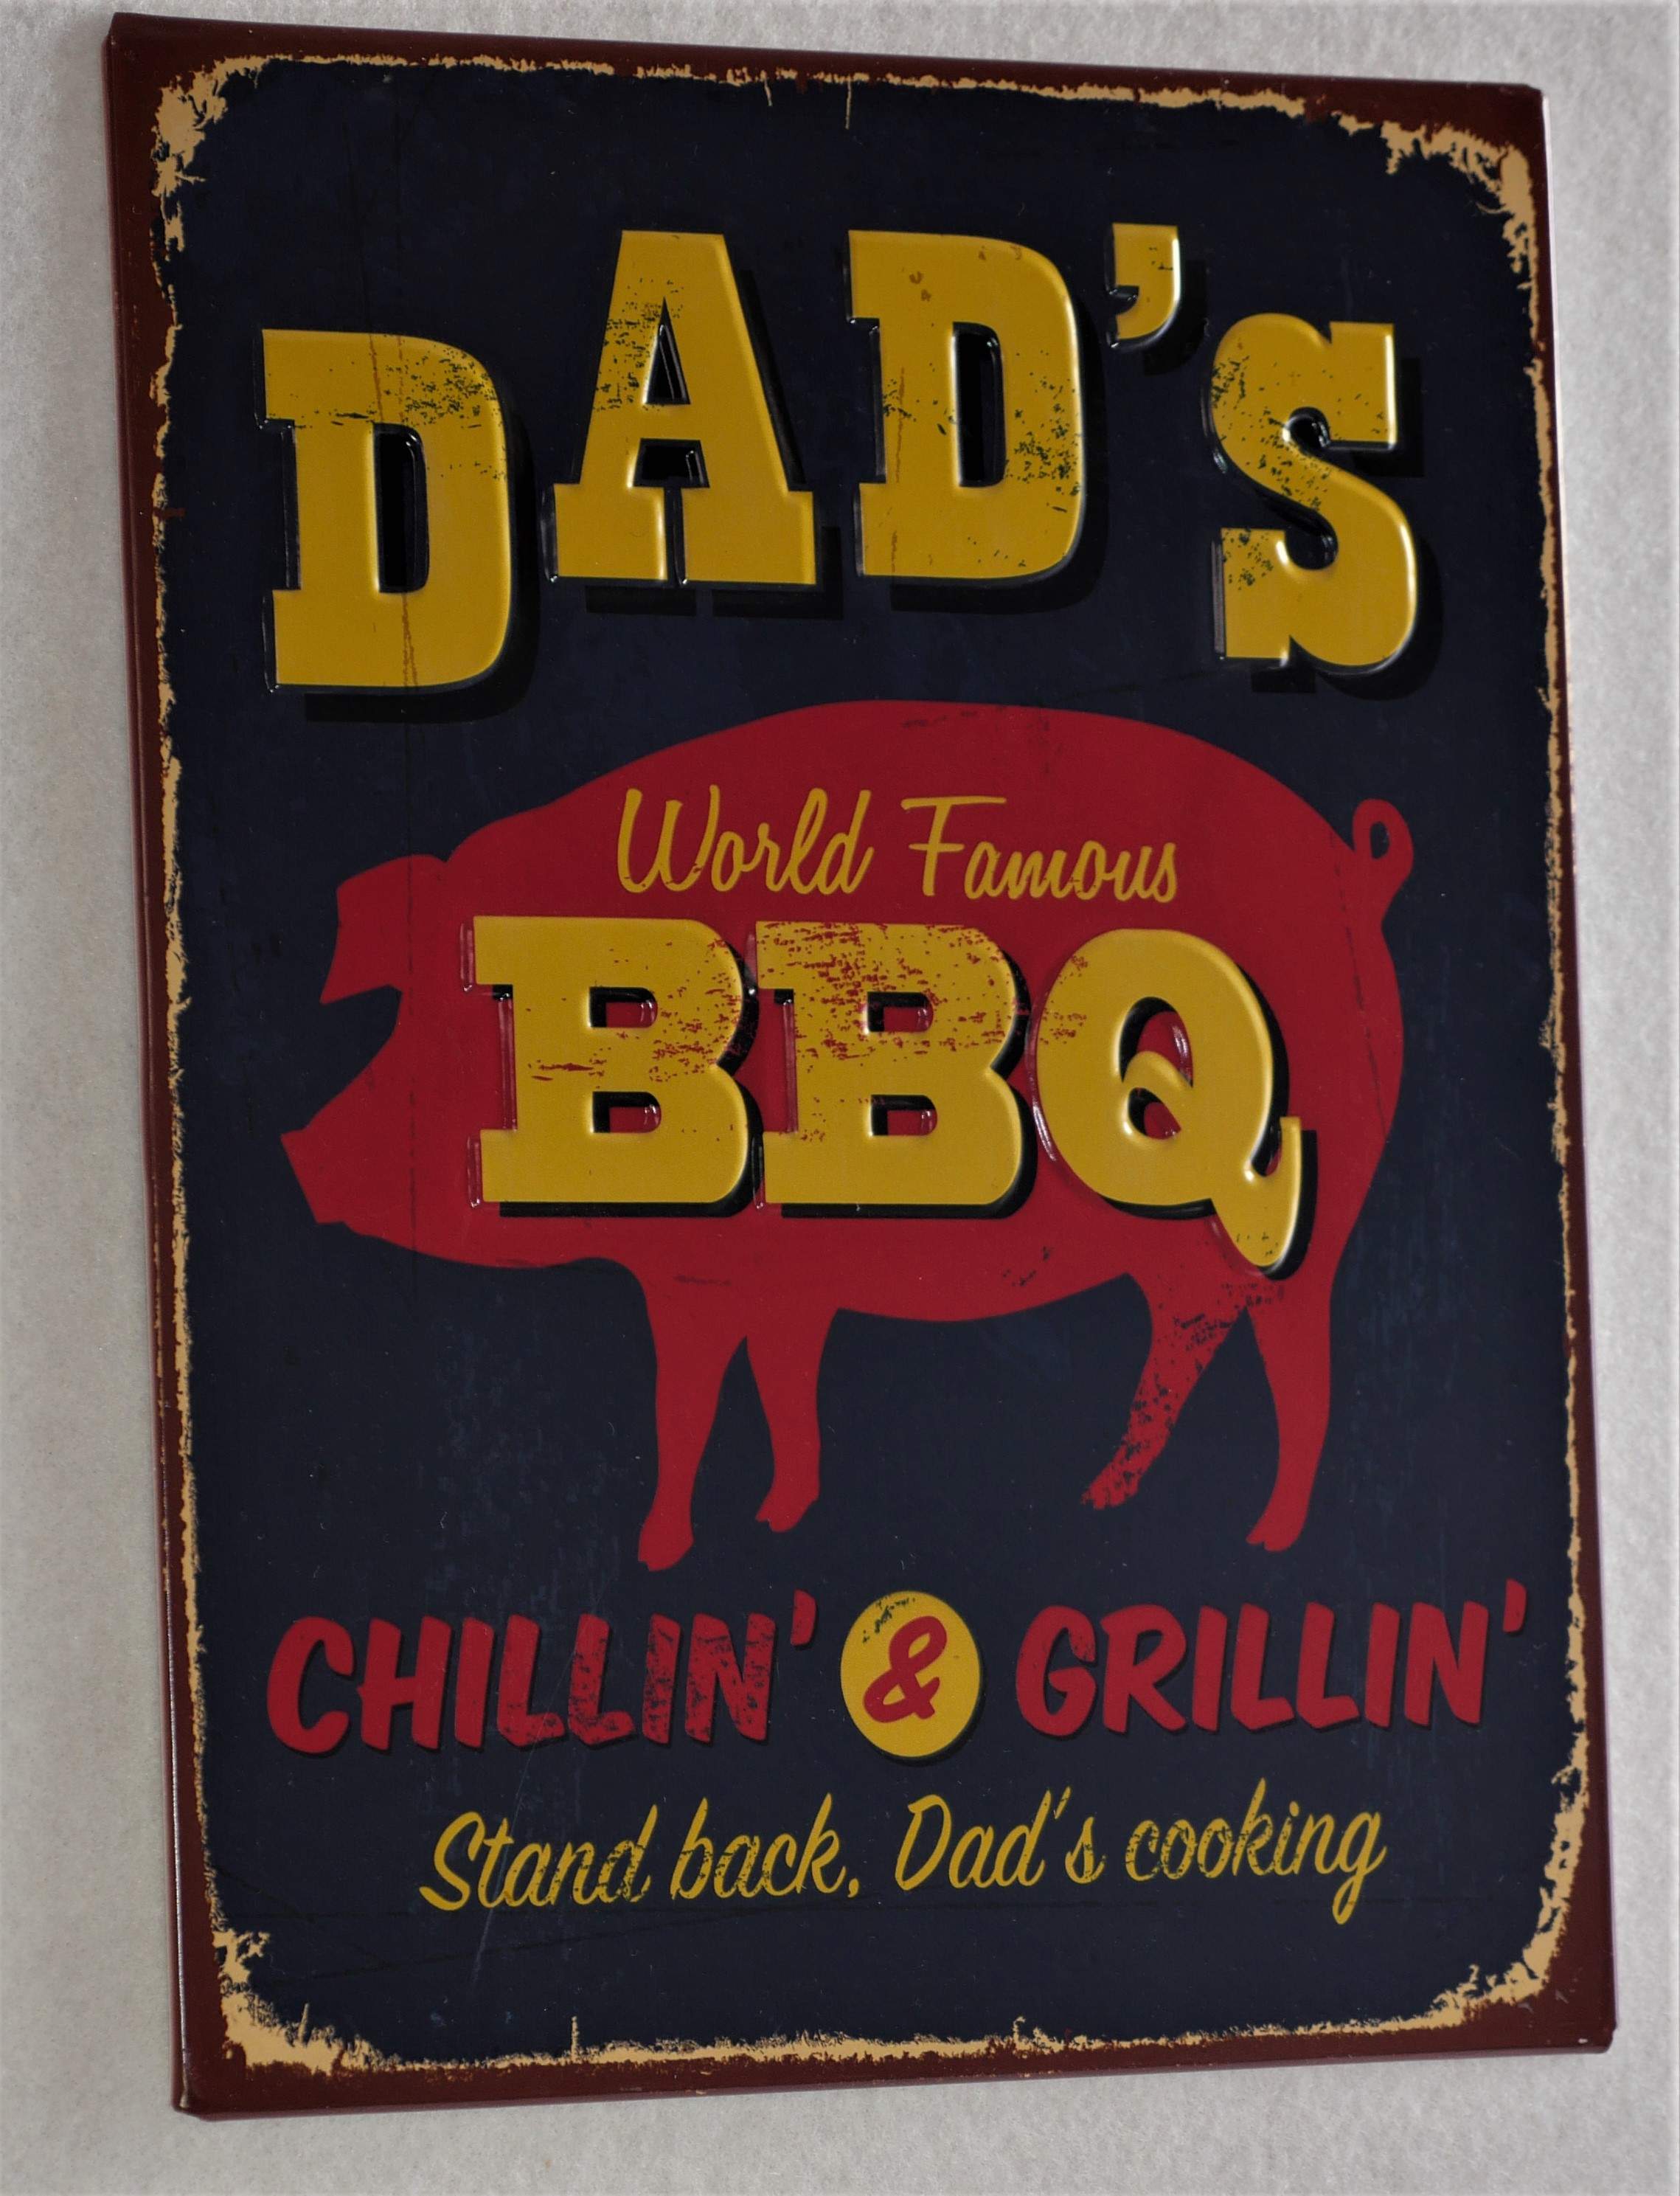 Metal Dad's barbecue wall sign.